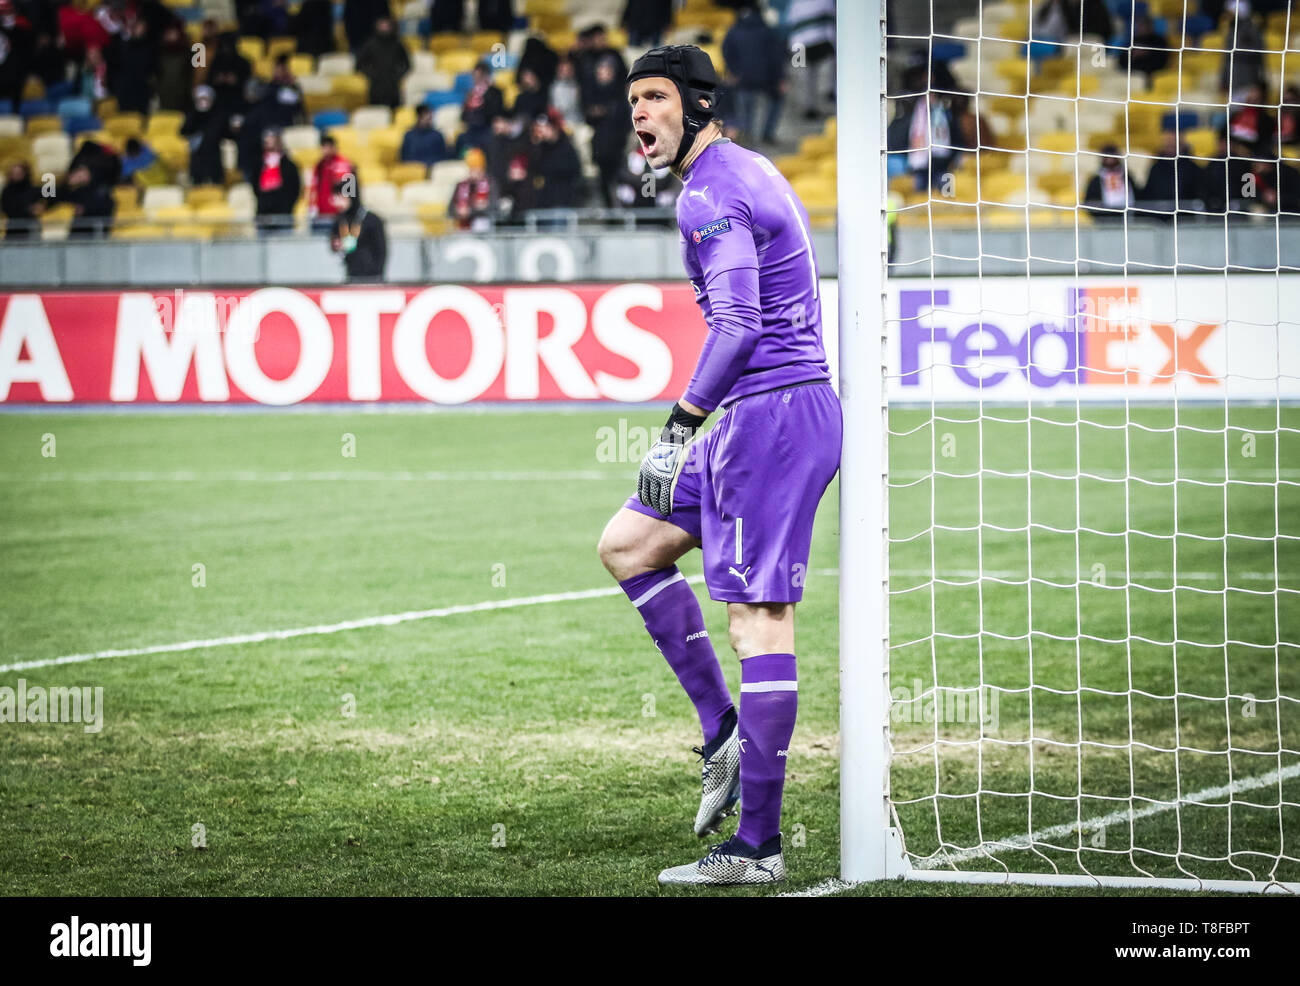 KYIV, UKRAINE - NOVEMBER 29, 2018: Goalkeeper Petr Cech of Arsenal in action during the UEFA Europa League game against Vorskla Poltava at NSC Olimpiy Stock Photo